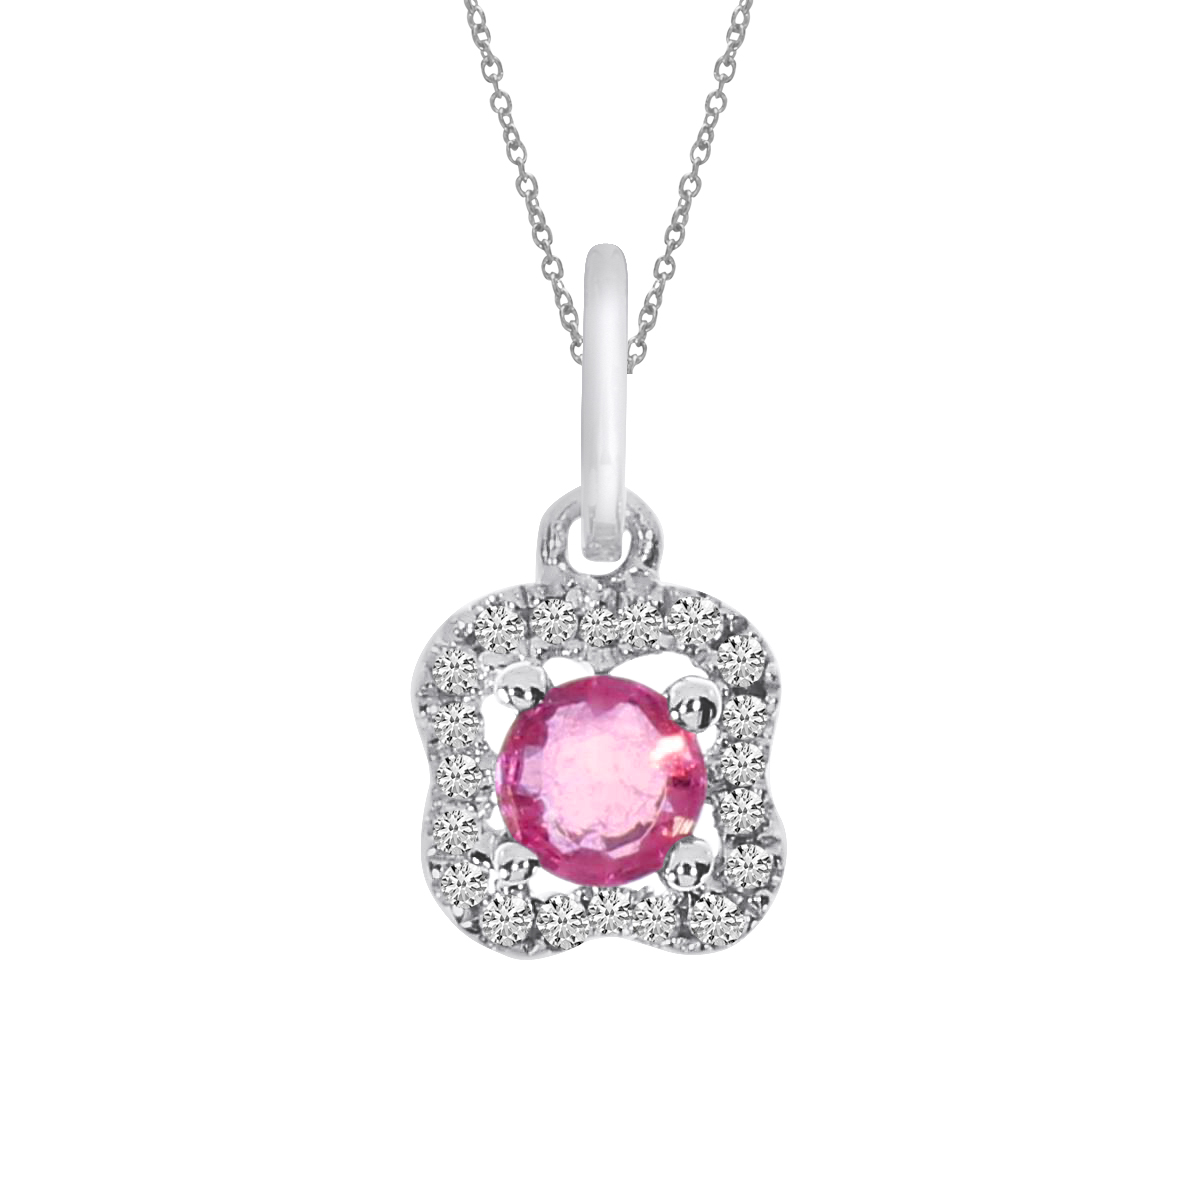 JCX2616: A charming pendant in 14k white gold with a beautiful 3.5 mm round ruby and .05 ct diamonds.